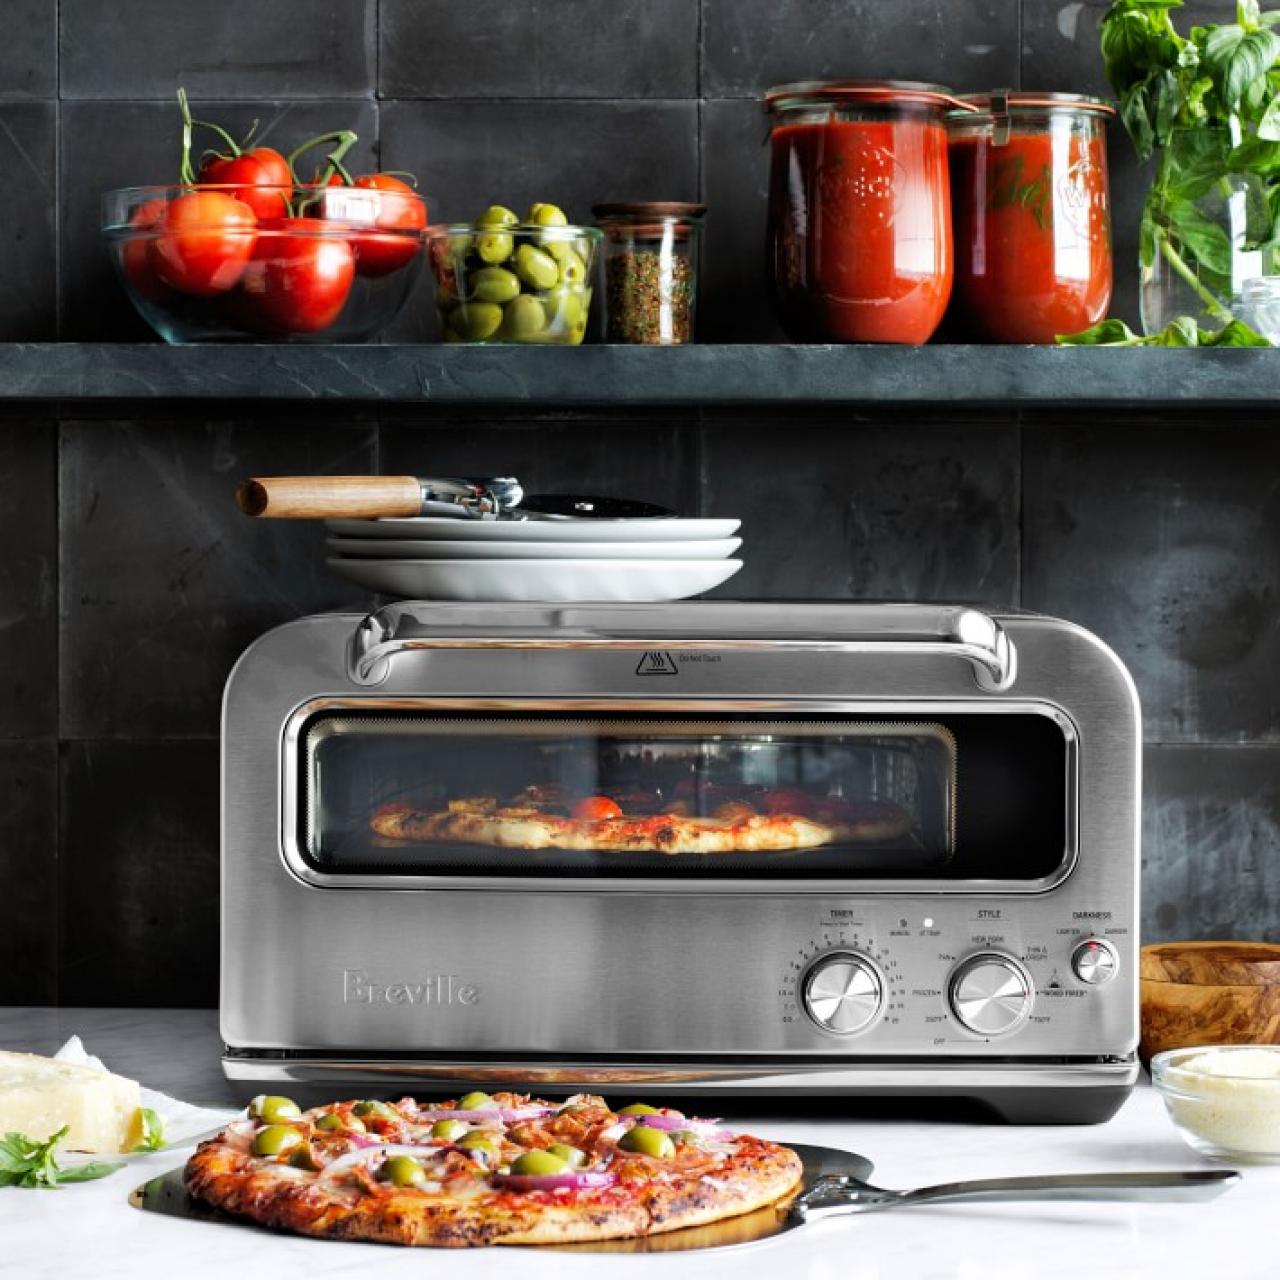 https://food.fnr.sndimg.com/content/dam/images/food/products/2020/4/16/rx_breville-smart-oven-pizzaiolo-pizza-oven-o.jpg.rend.hgtvcom.1280.1280.suffix/1587062512809.jpeg